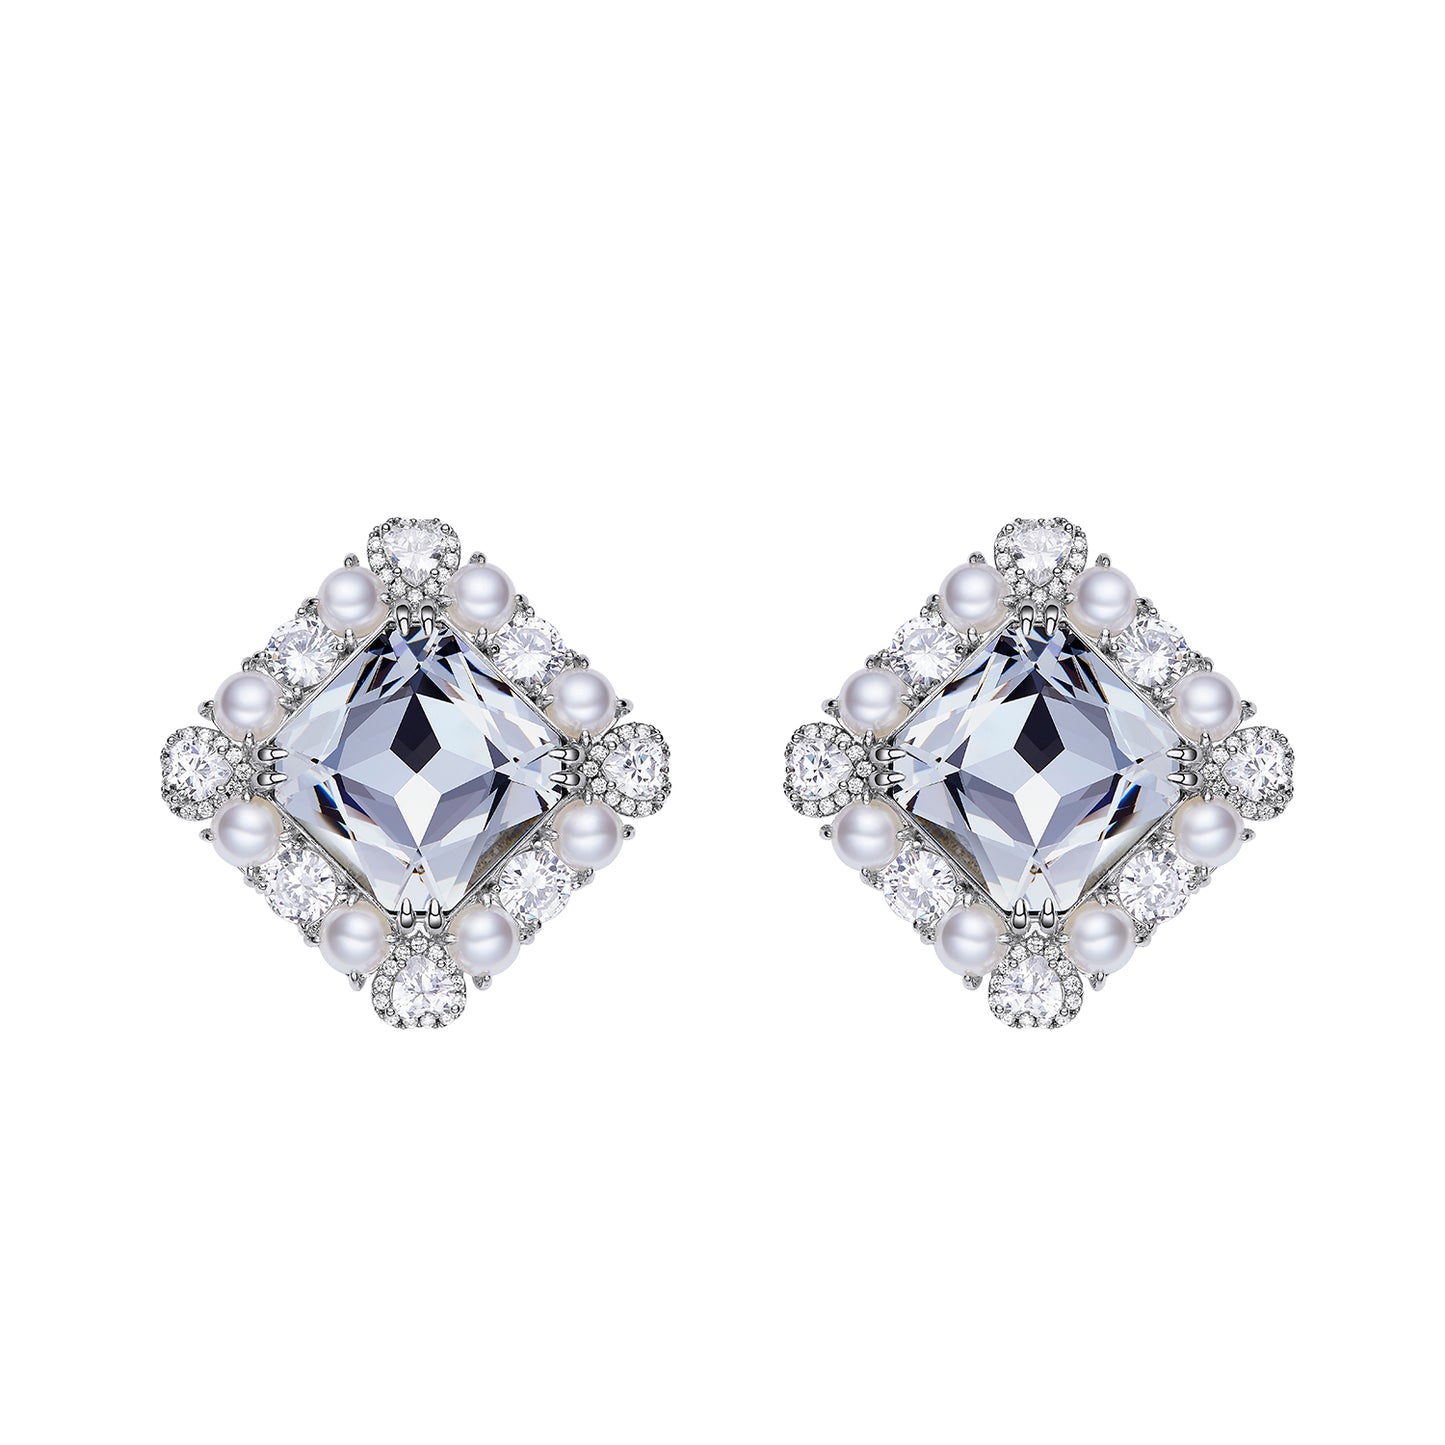 Diamond Shaped Earrings with Pearl Accents